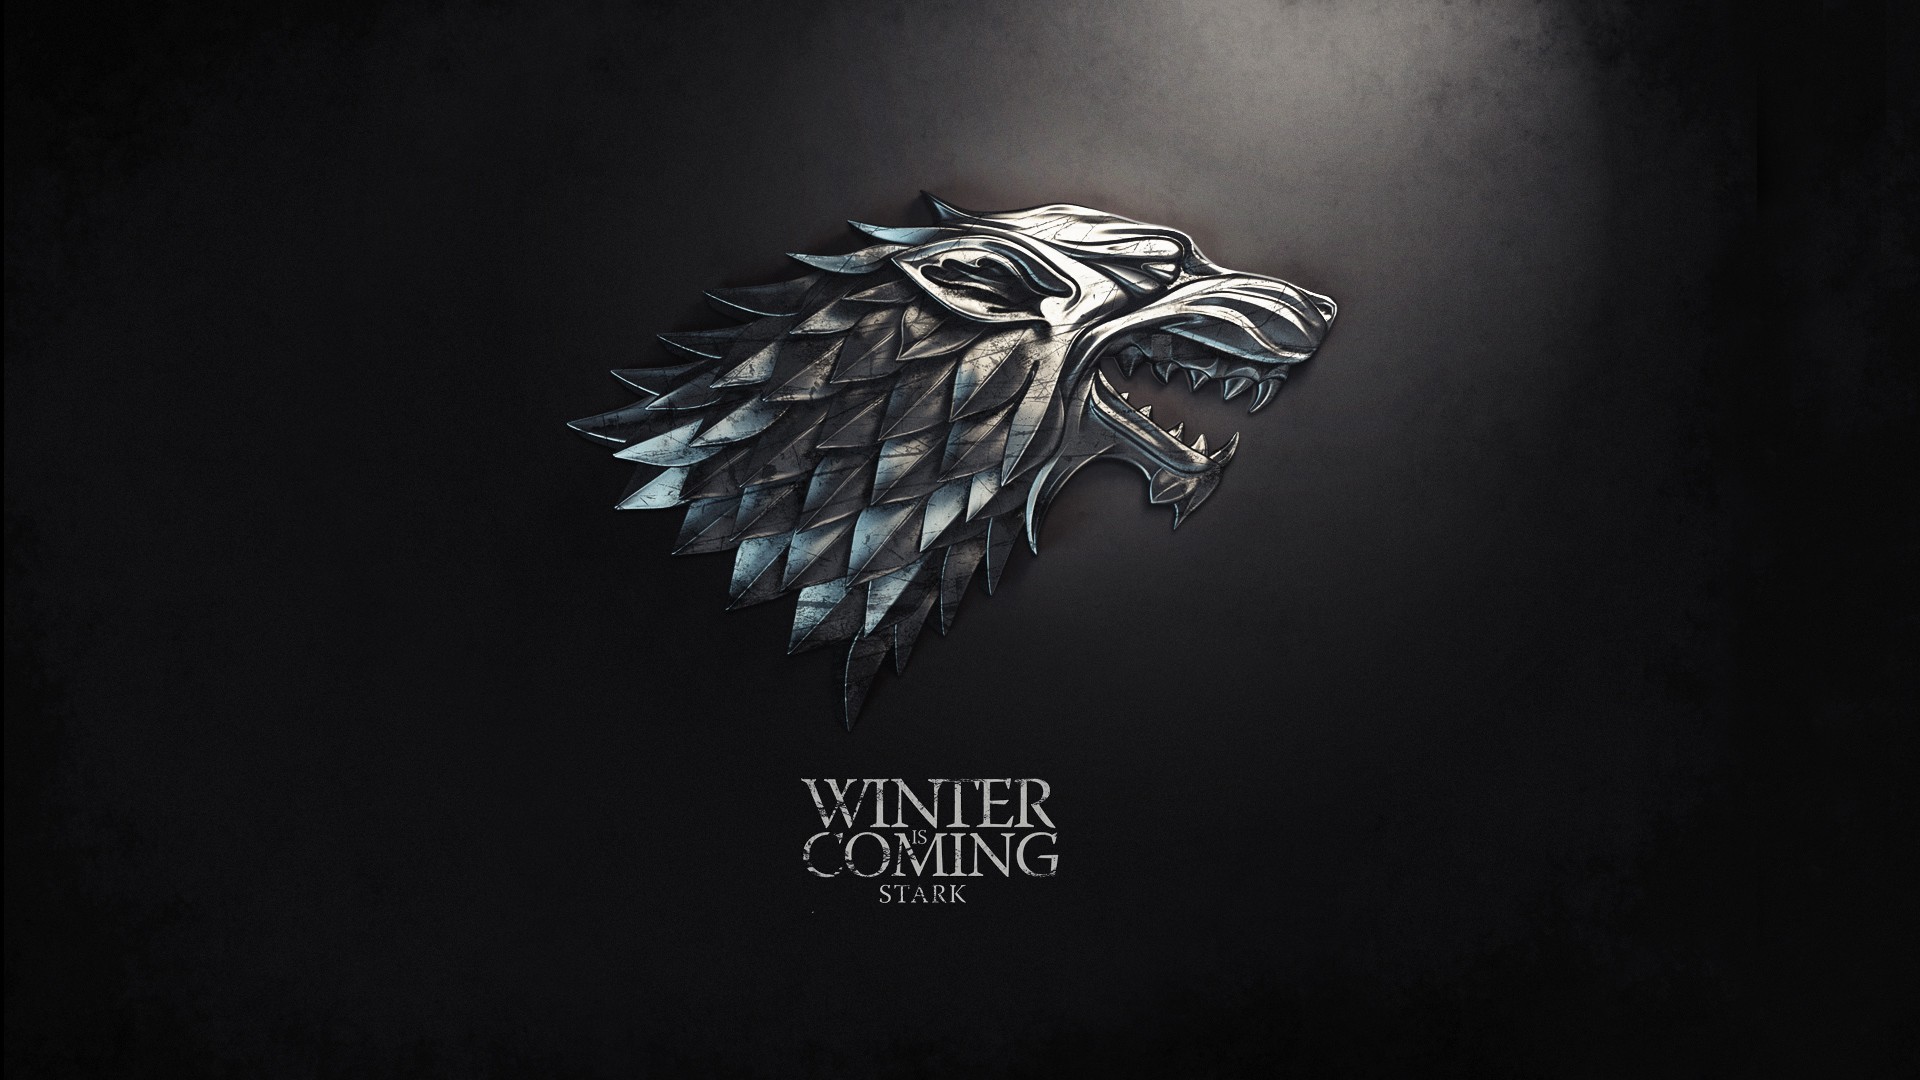 General 1920x1080 Game of Thrones A Song of Ice and Fire digital art House Stark Direwolf Winter Is Coming sigils simple background TV series